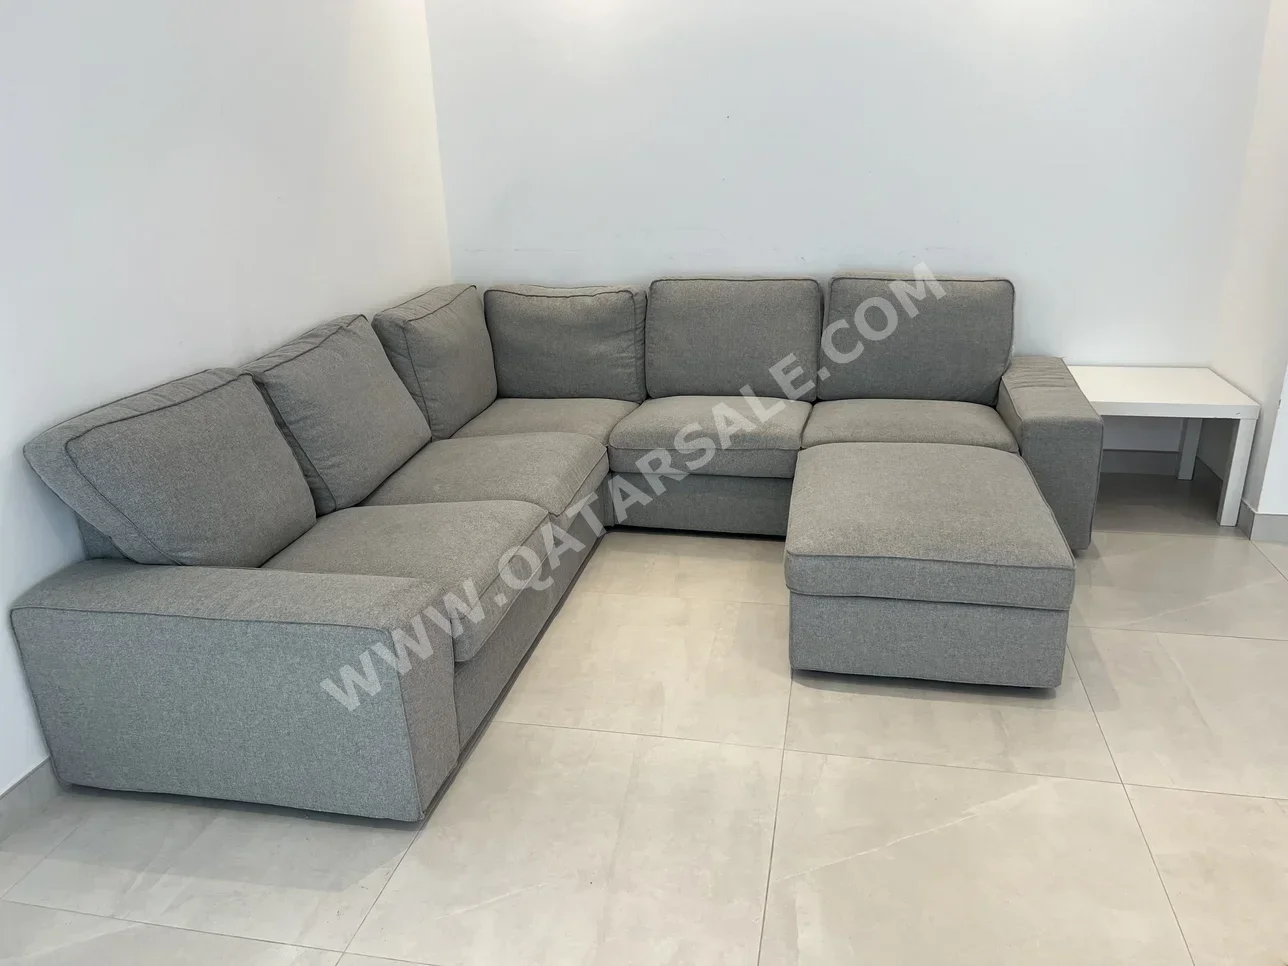 Sofas, Couches & Chairs L shape  - Fabric  - Gray